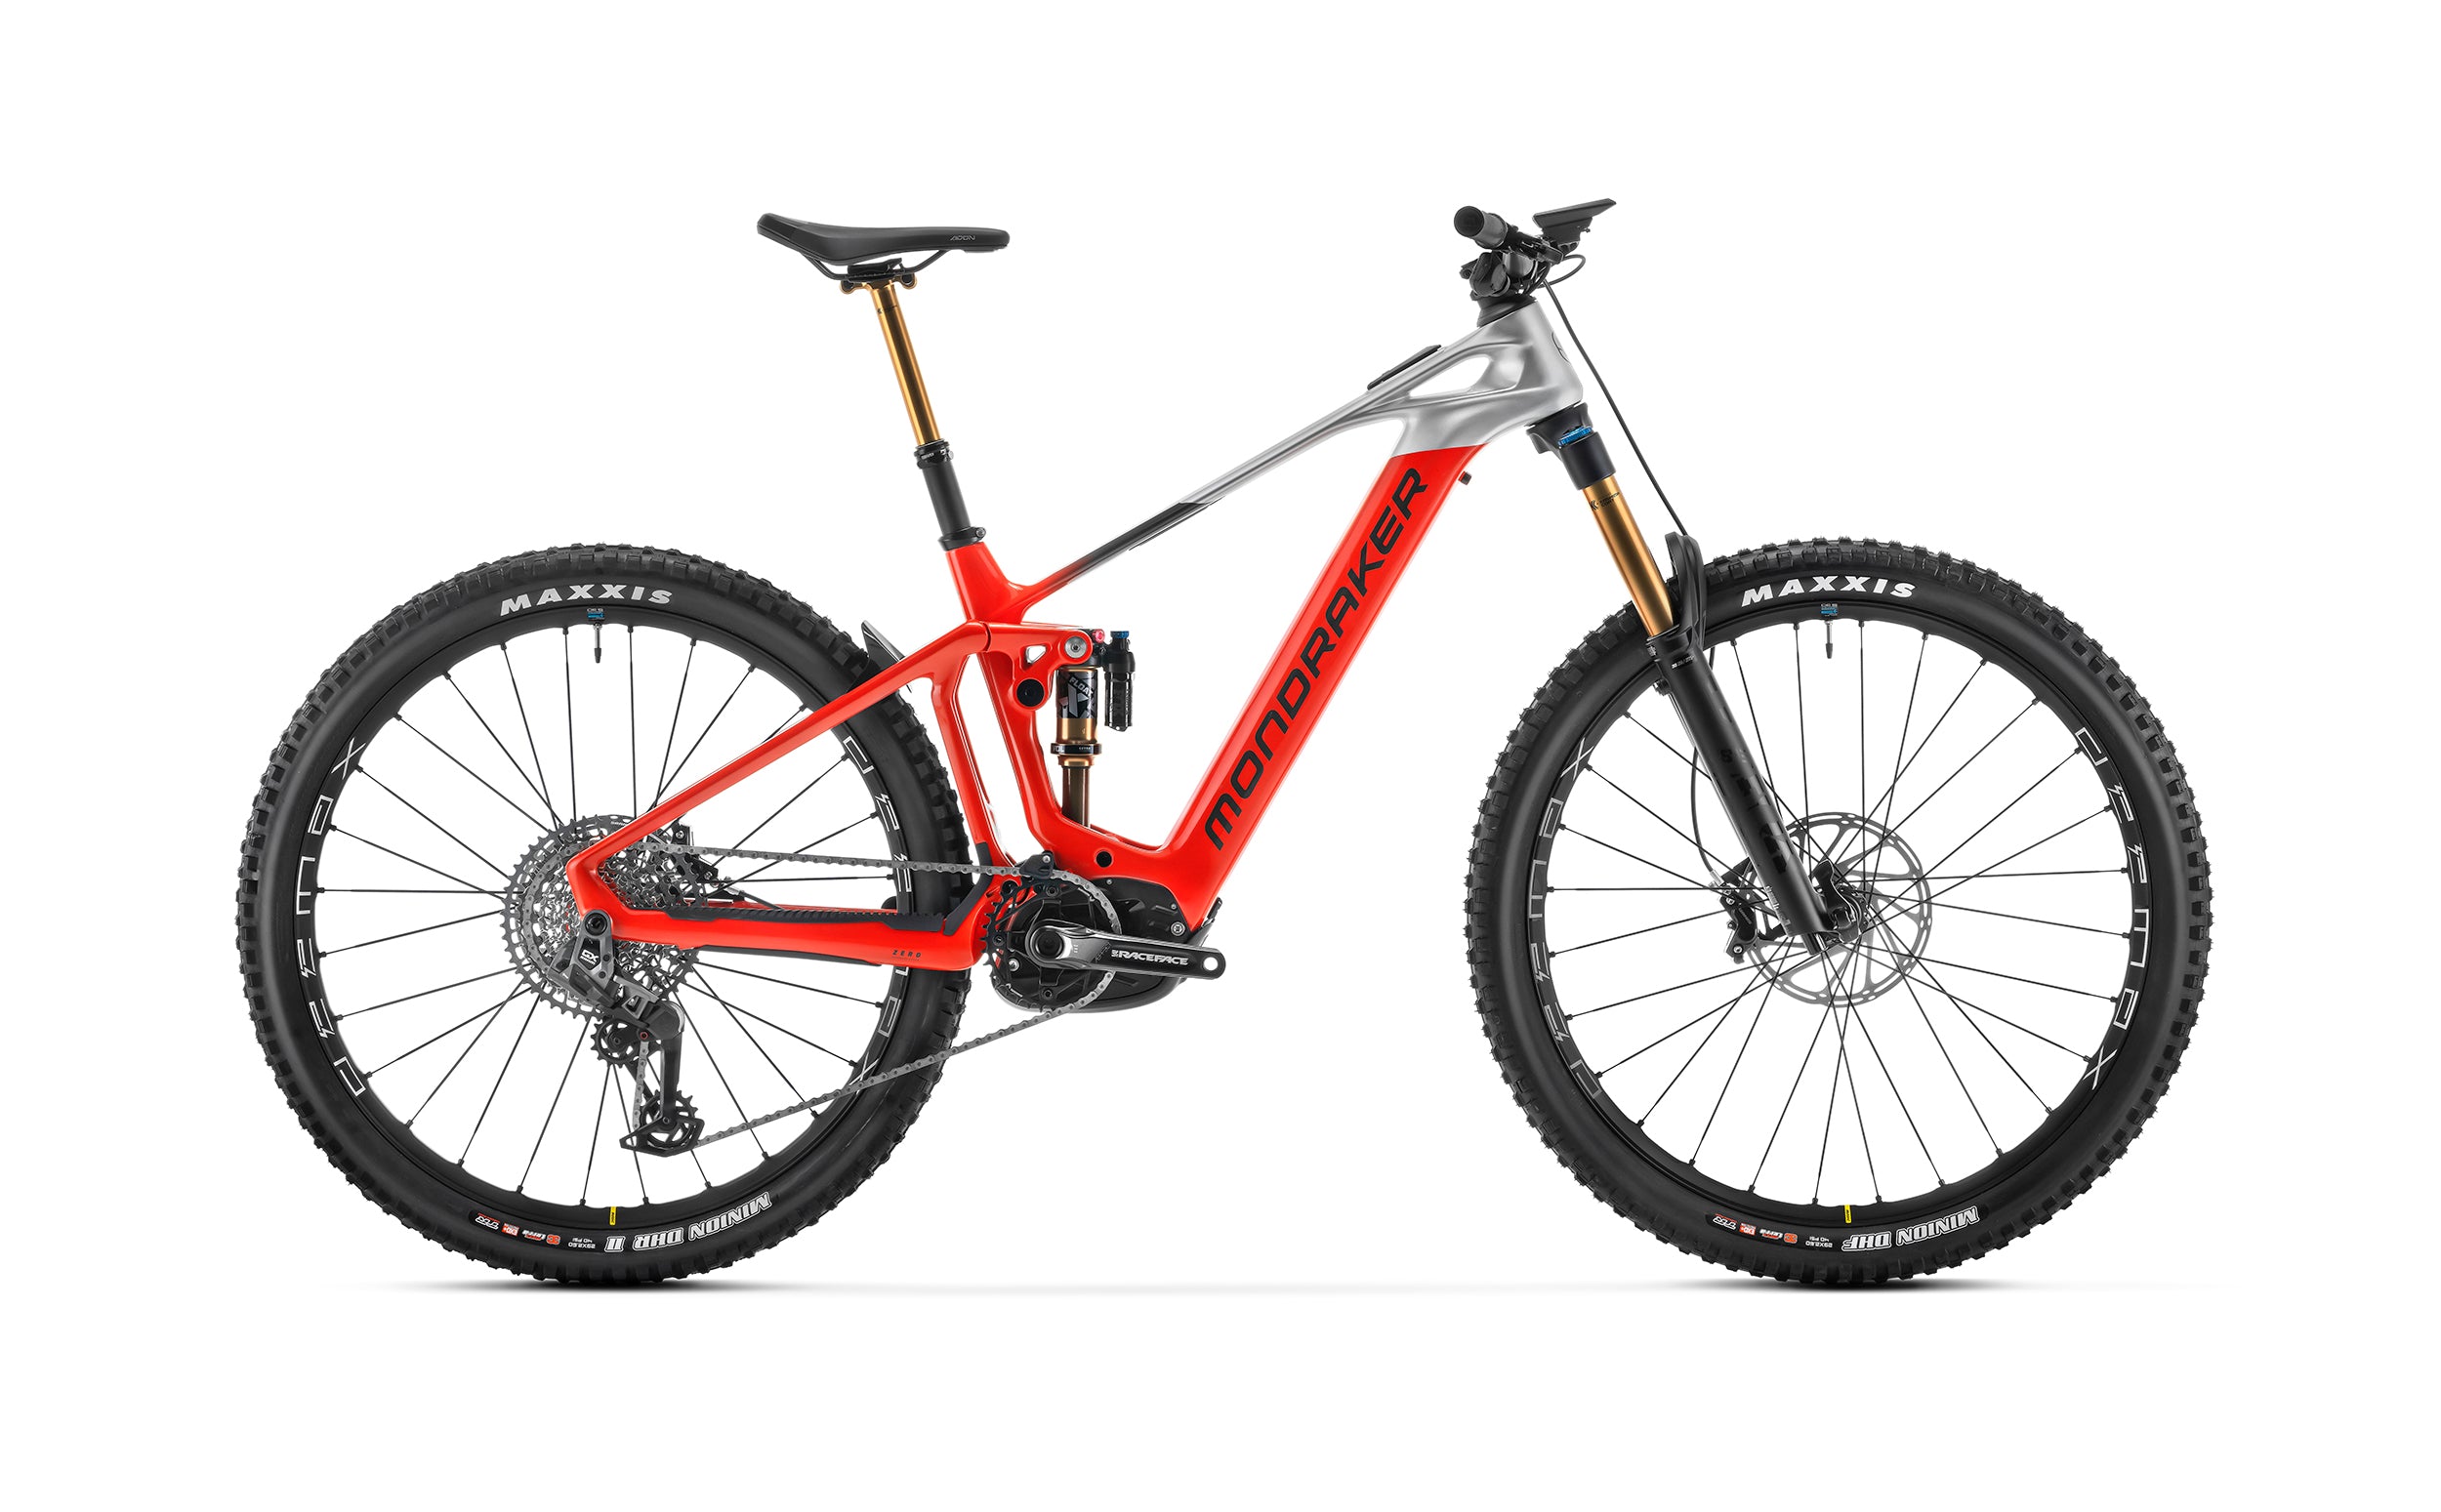 Mondraker Crafty Carbon RR Electric Mountain Bike - Flame Red